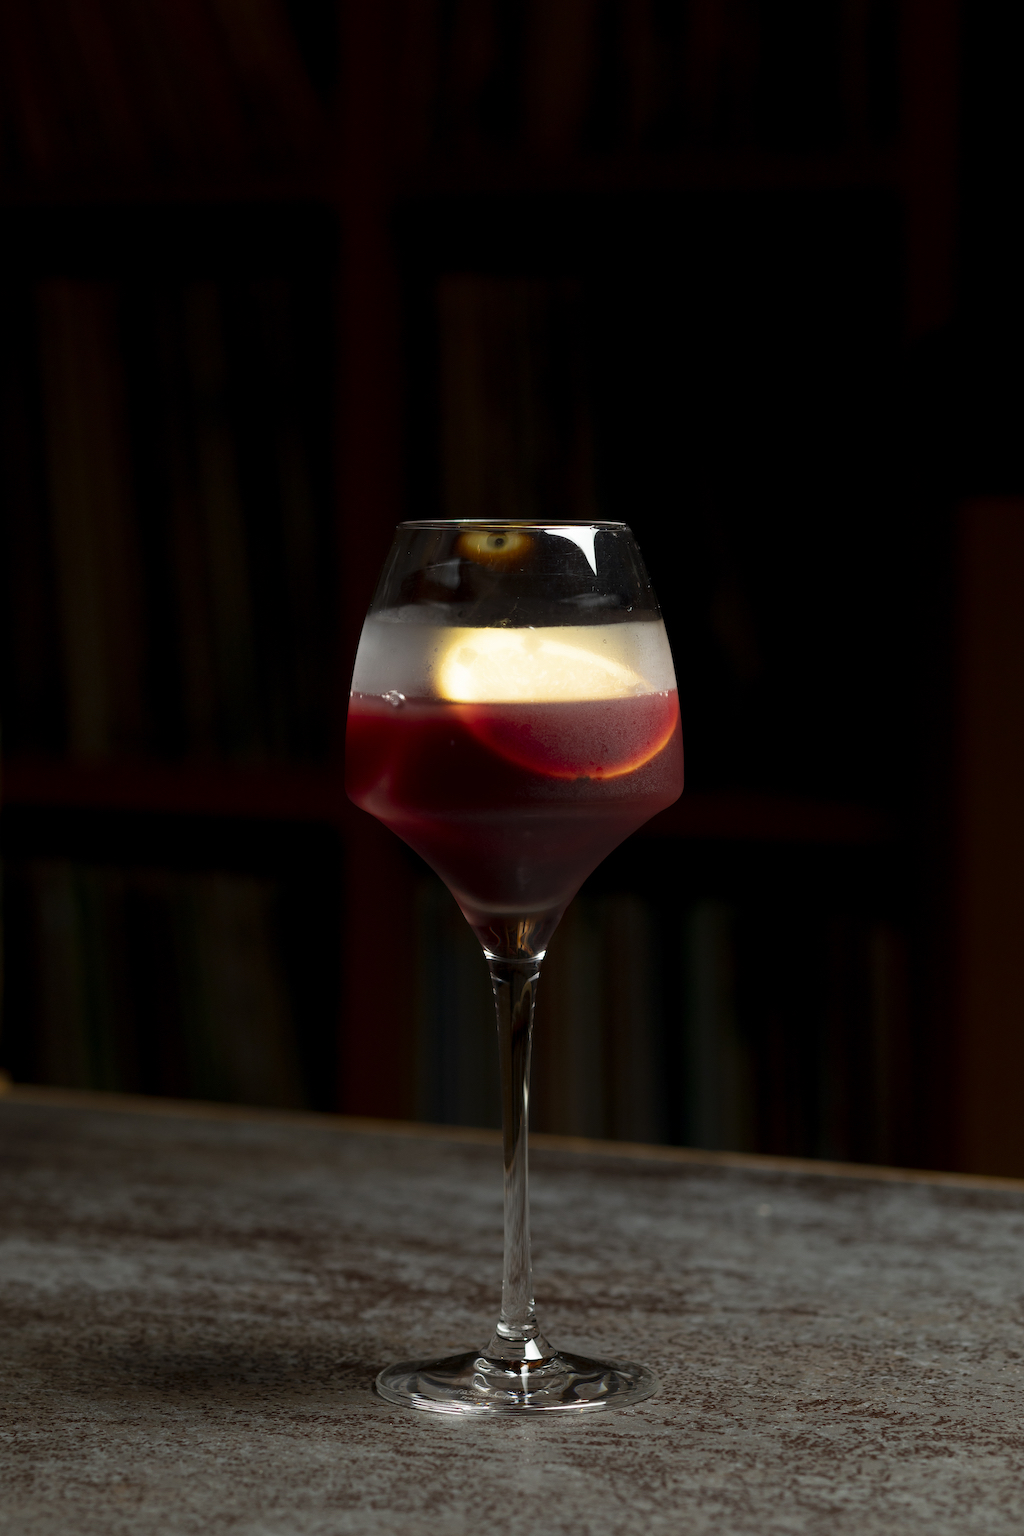 Promise, a cocktail based on the song by Sade